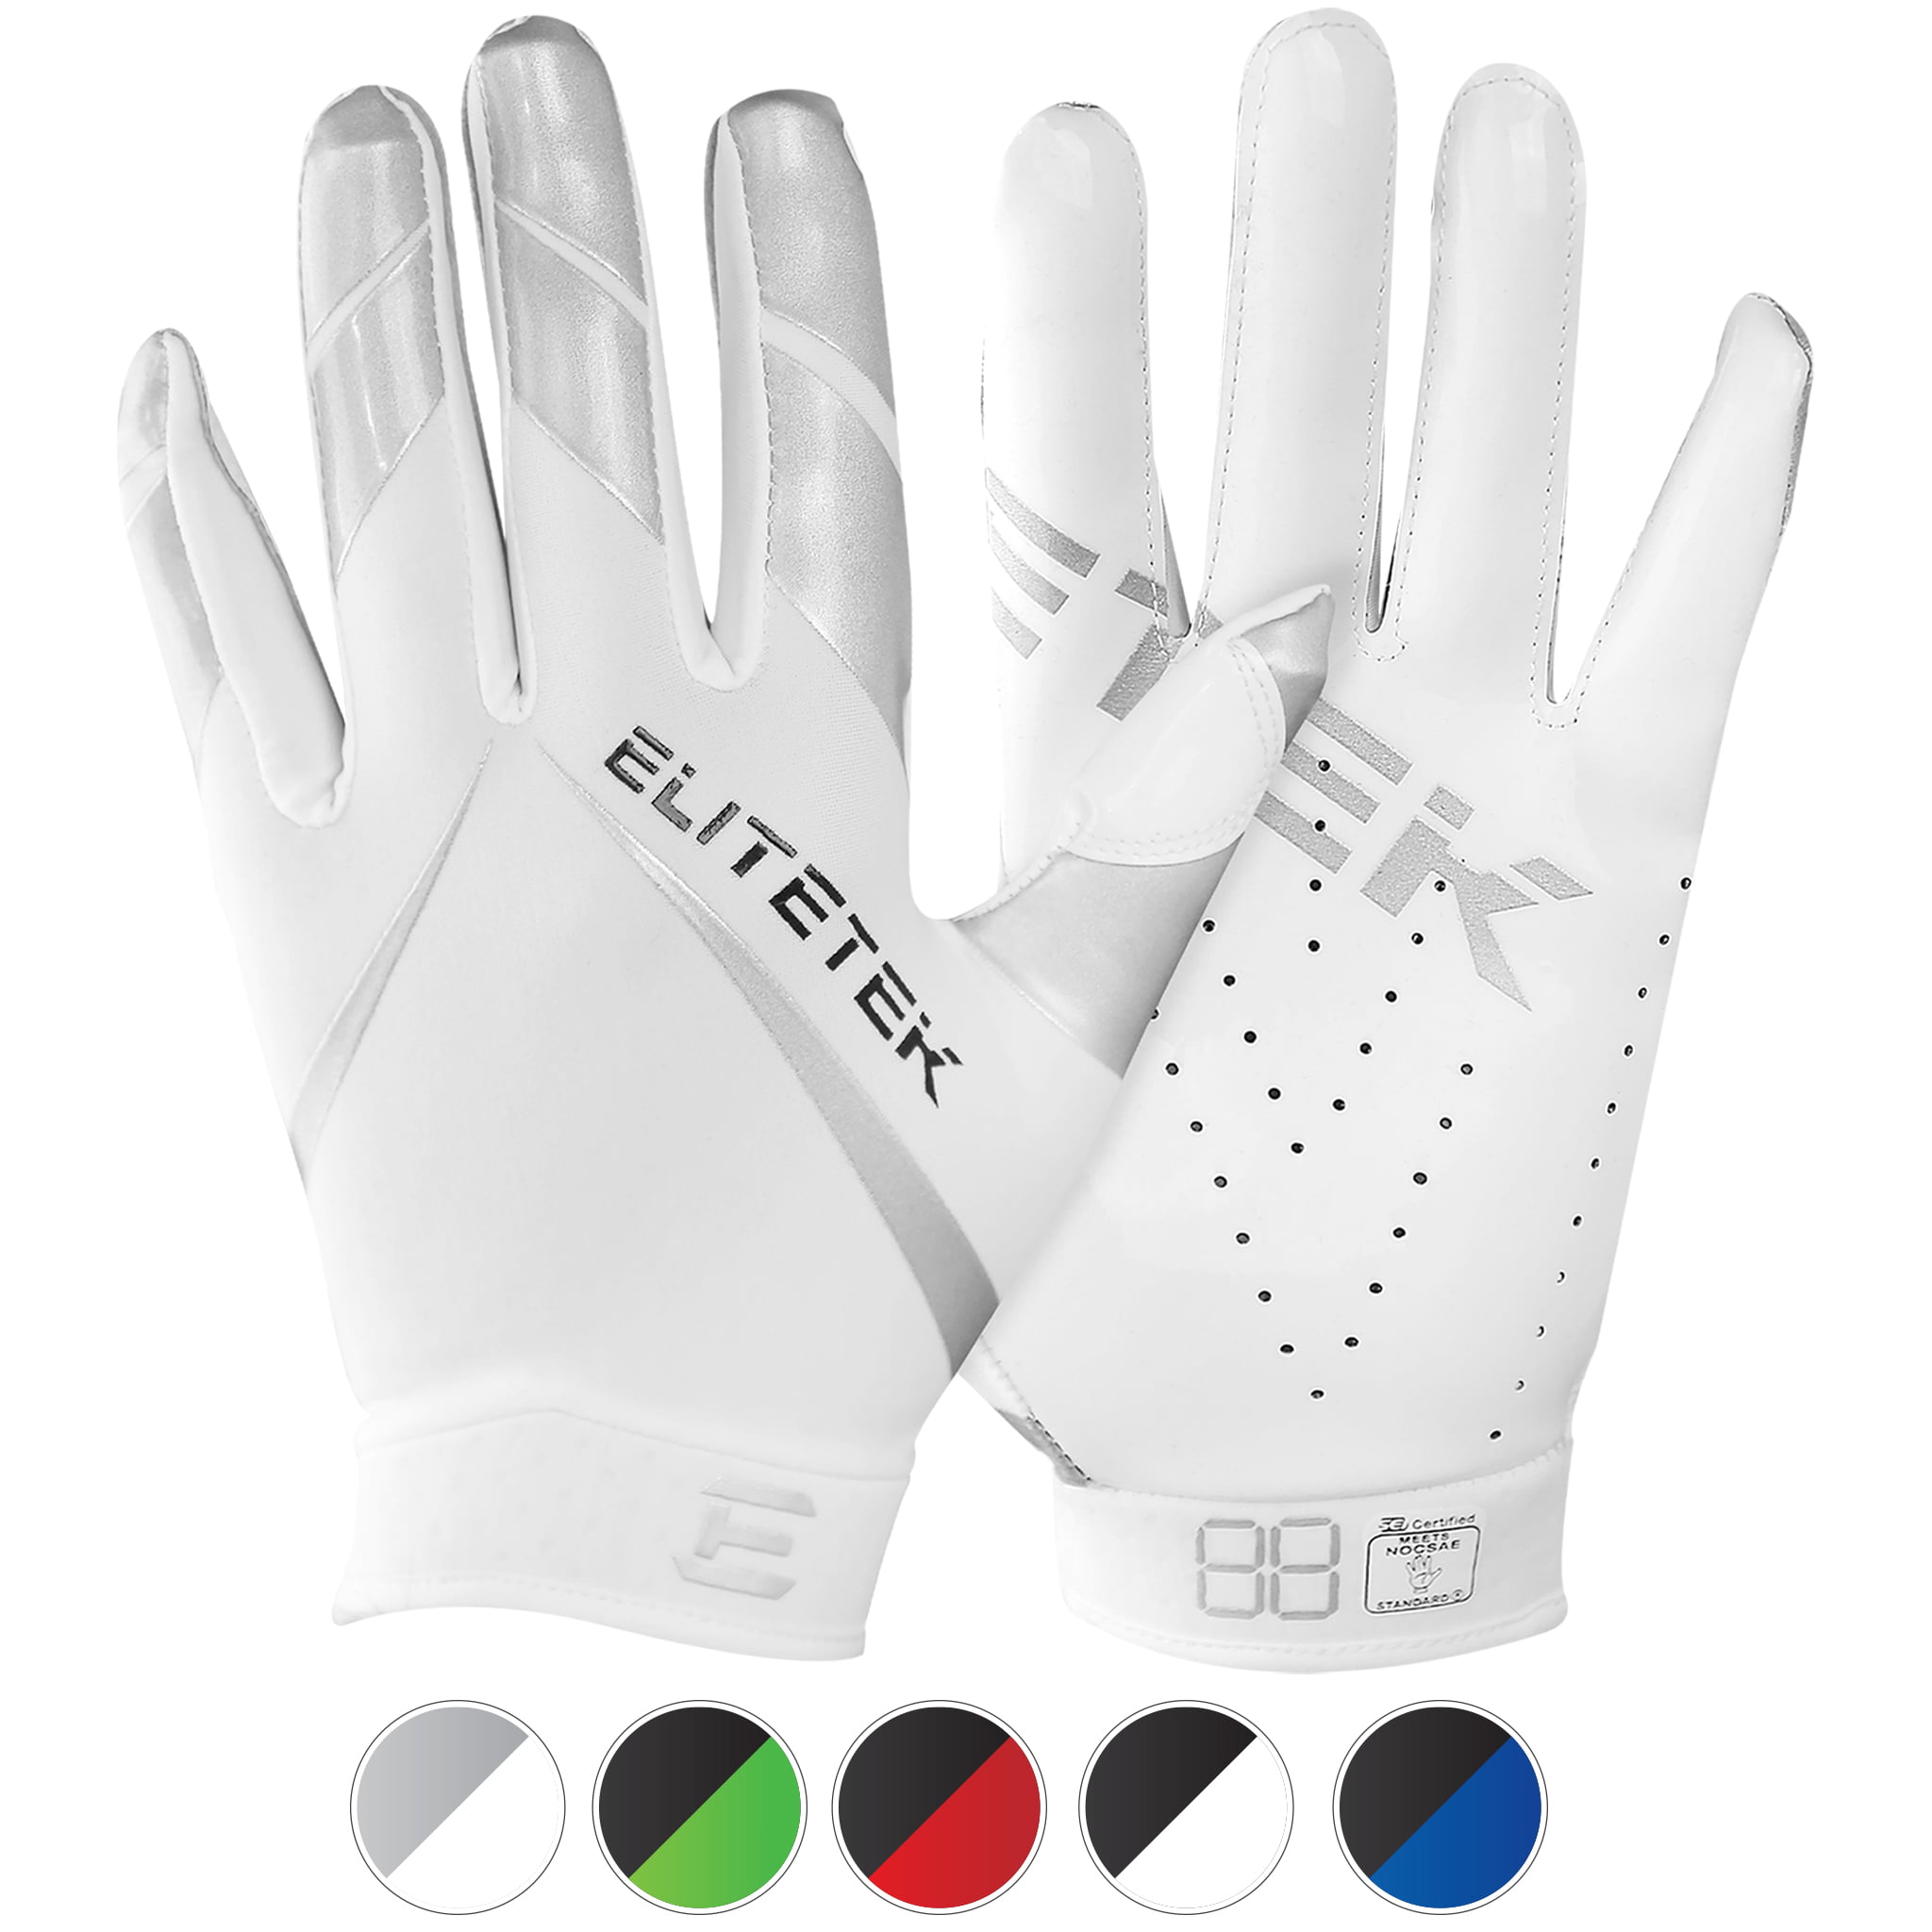 EliteTek RG-14 Football Gloves Youth and Adult (White/Silver, Youth XS)